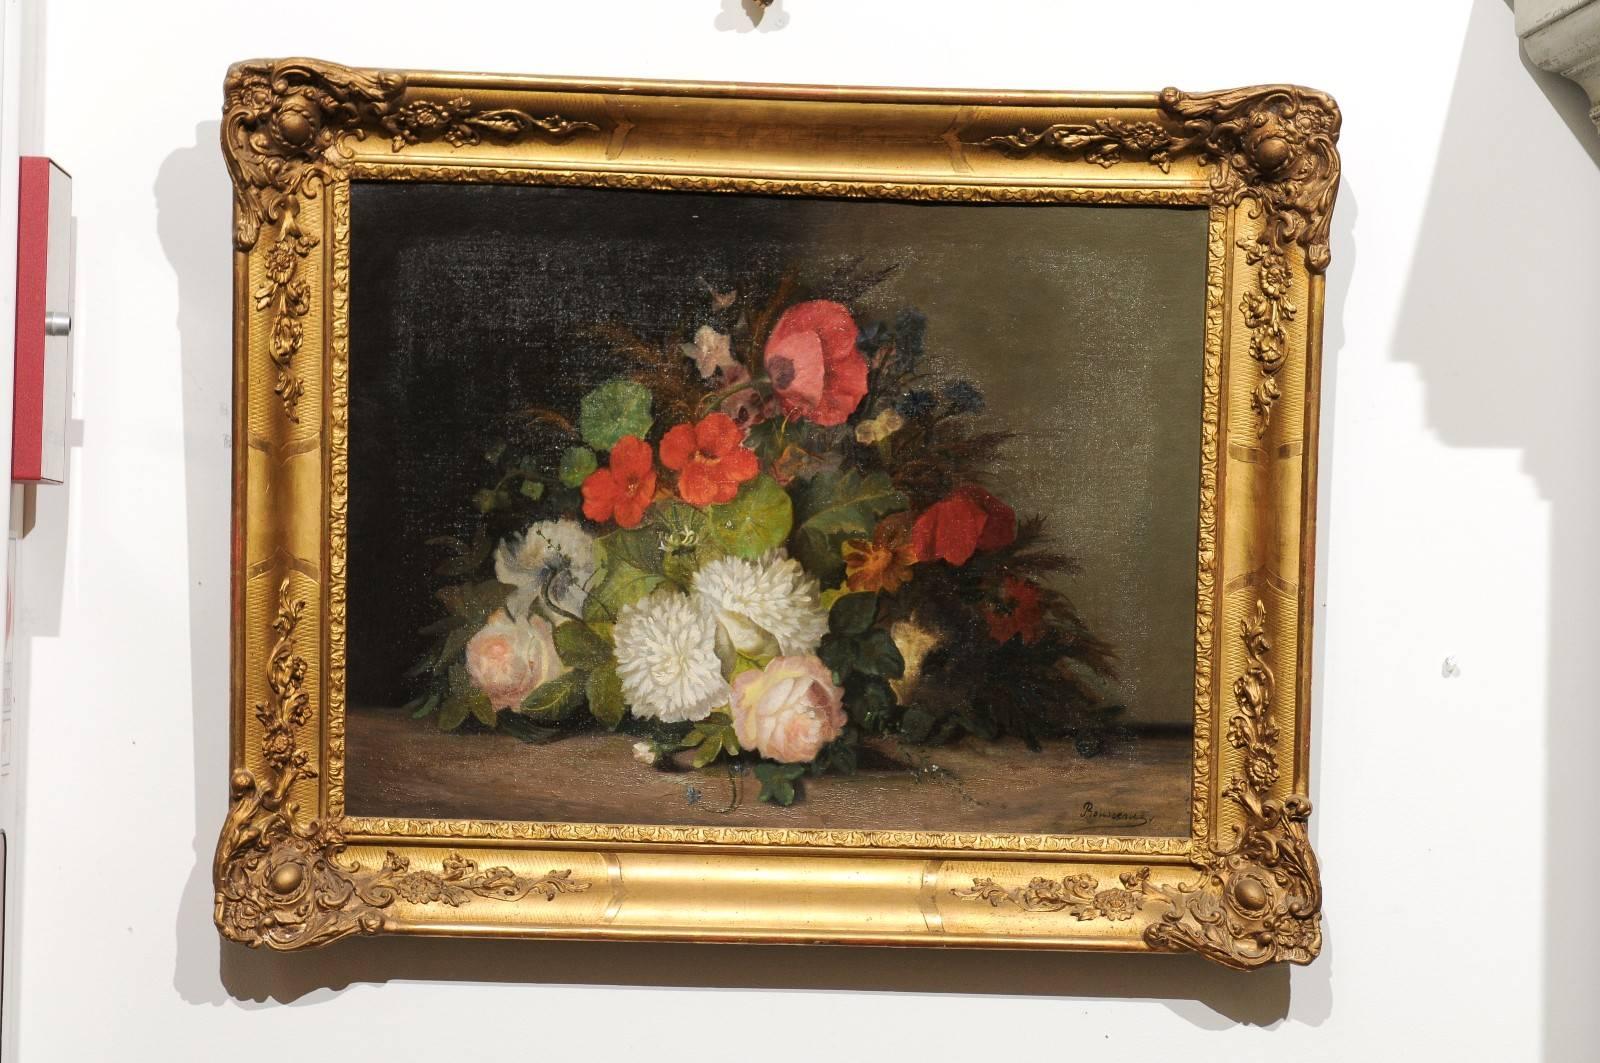 A 19th century framed oil on canvas floral painting signed by French artist Philippe Rousseau (1816-1887). This French still-life painting depicts an exquisite bouquet of flowers placed on a neutral background, in a manner resembling the production